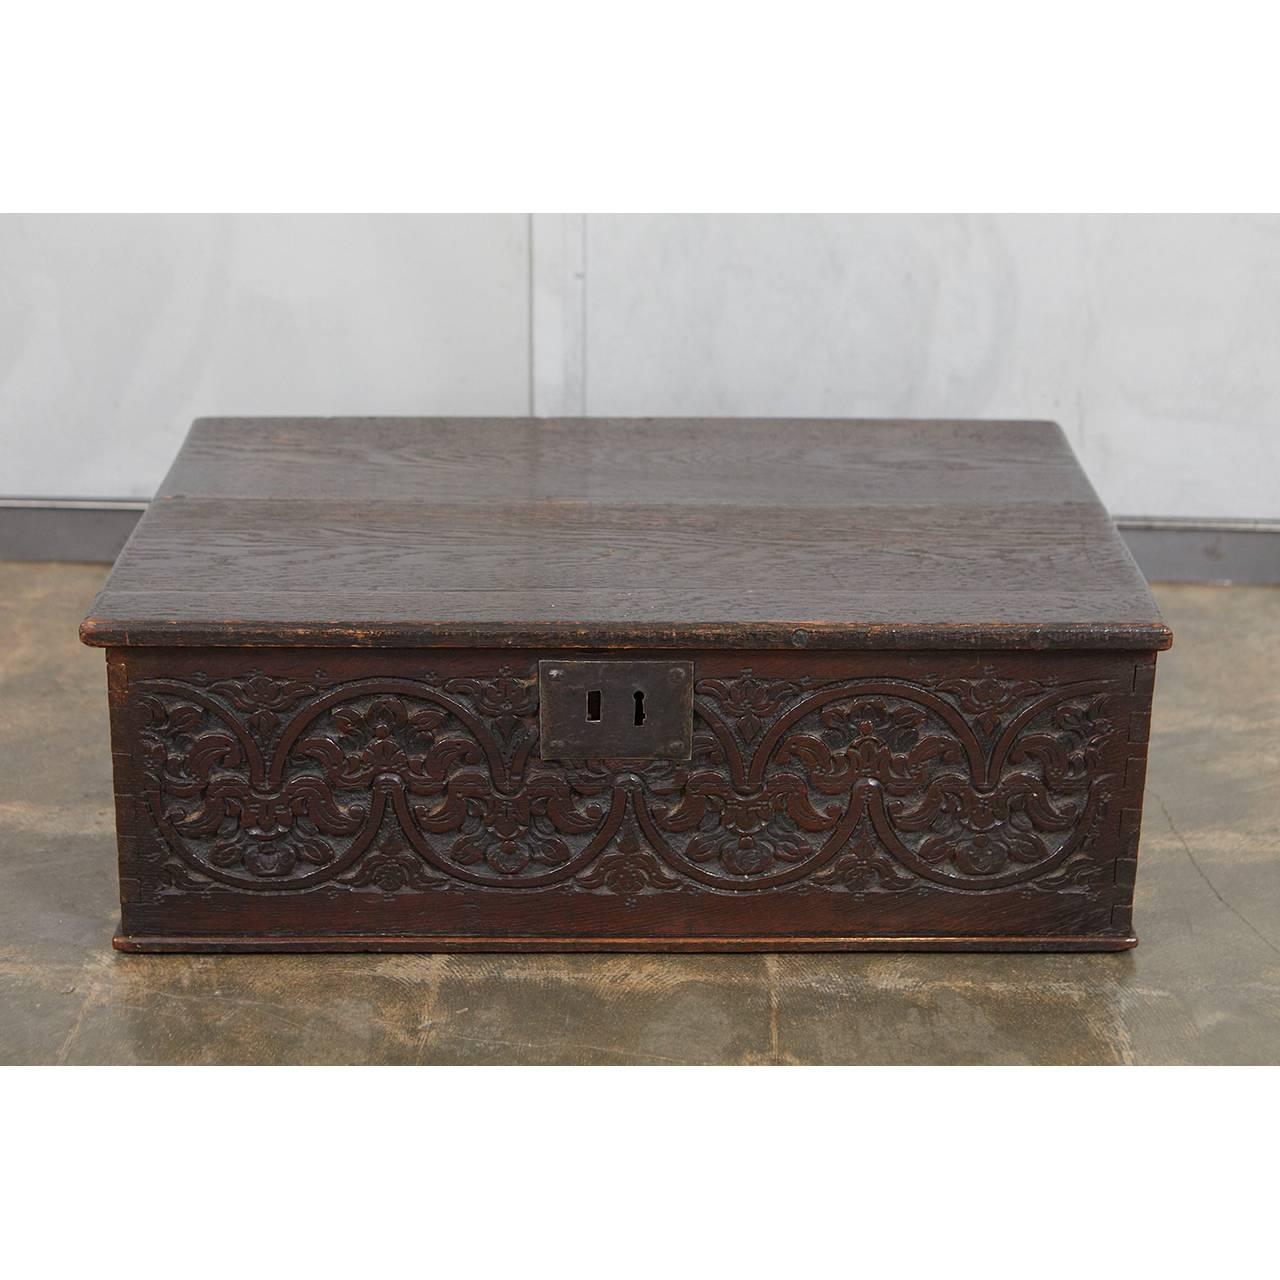 This carved oak bible box has a nice front panel with flora and fauna decorative elements. The piece has indications of its age including handmade nails and large old growth boards. The lock has worn away from the inside and the hinges were replaced